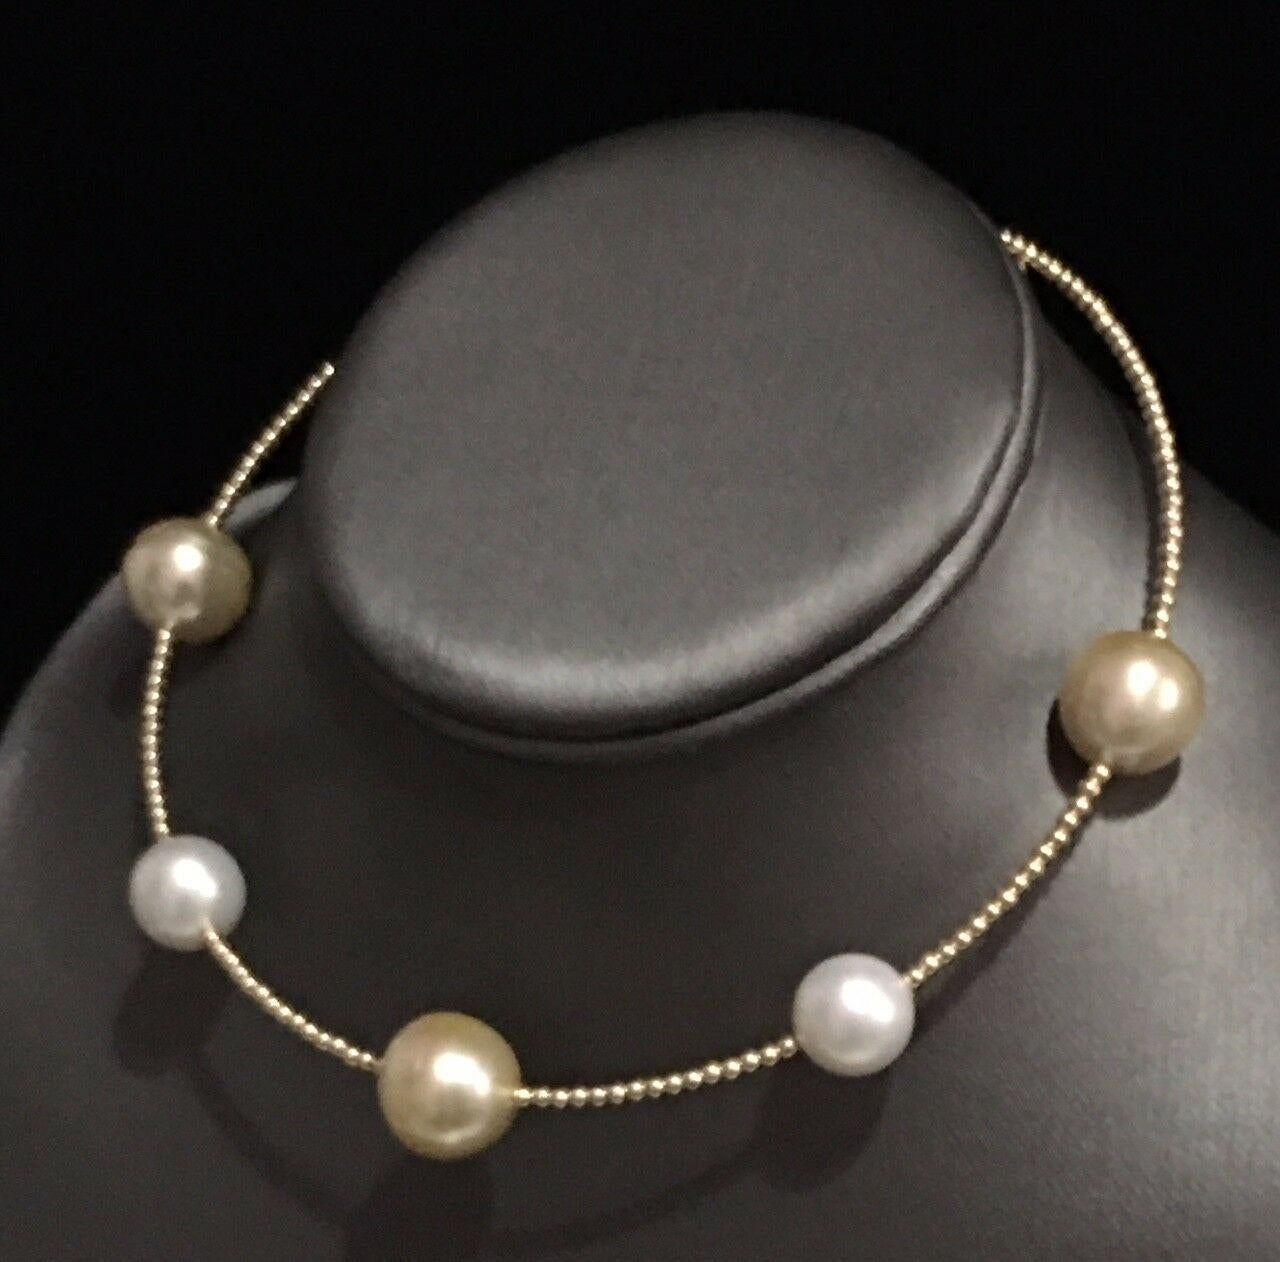 Modern Golden South Sea Pearl Necklace 14k Gold Italy Italy Certified